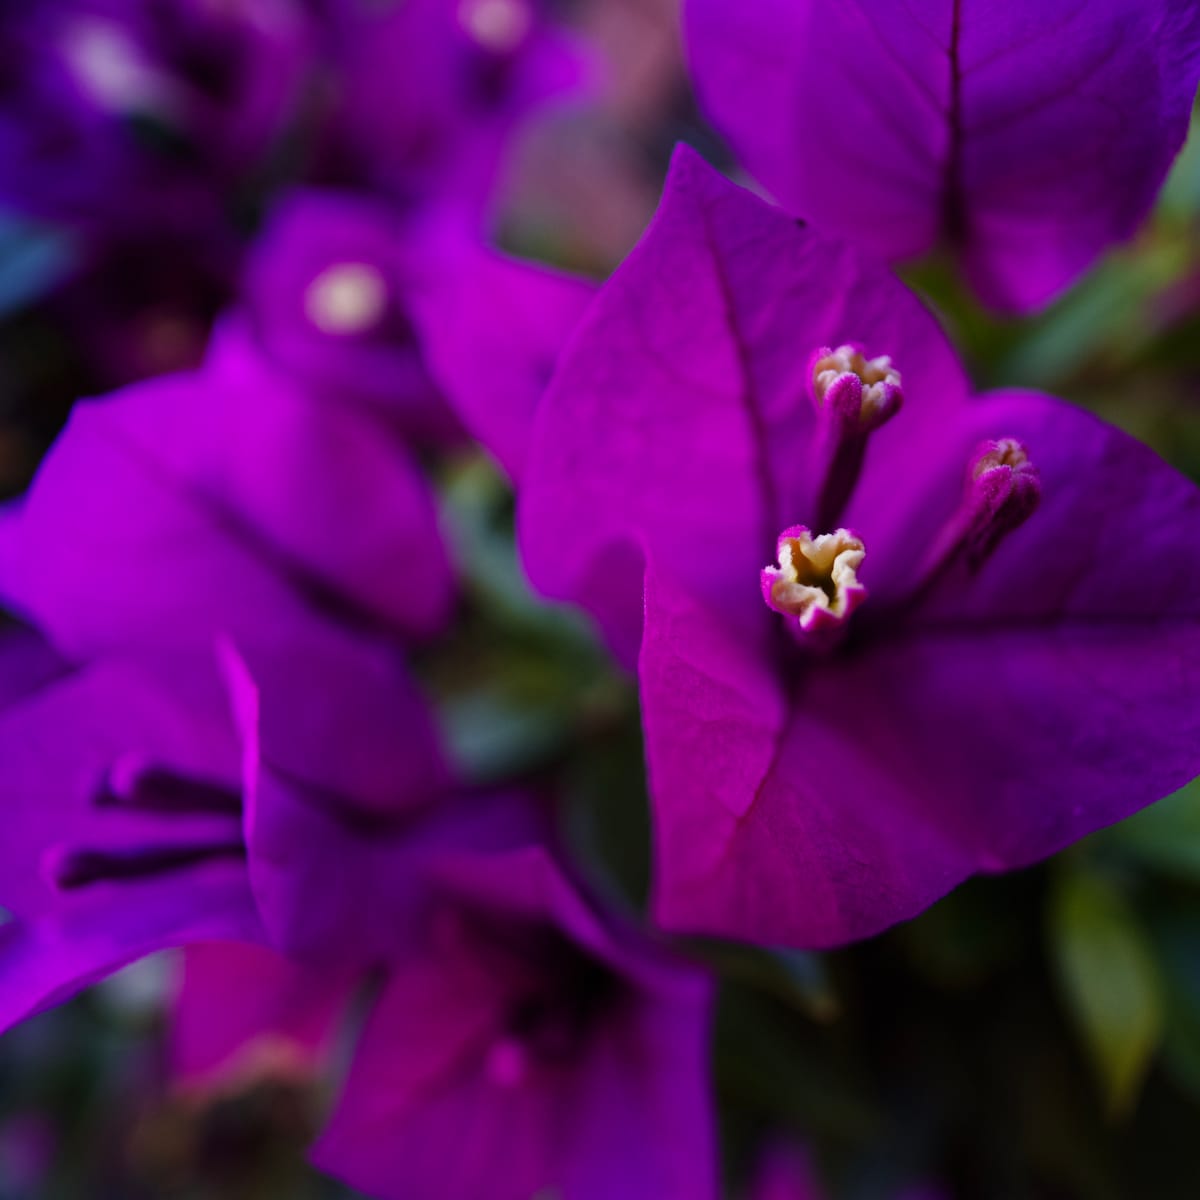 Macro image of the pistils (?) peeking out of bougainvillea bracts which are a vivid magenta with blue tones